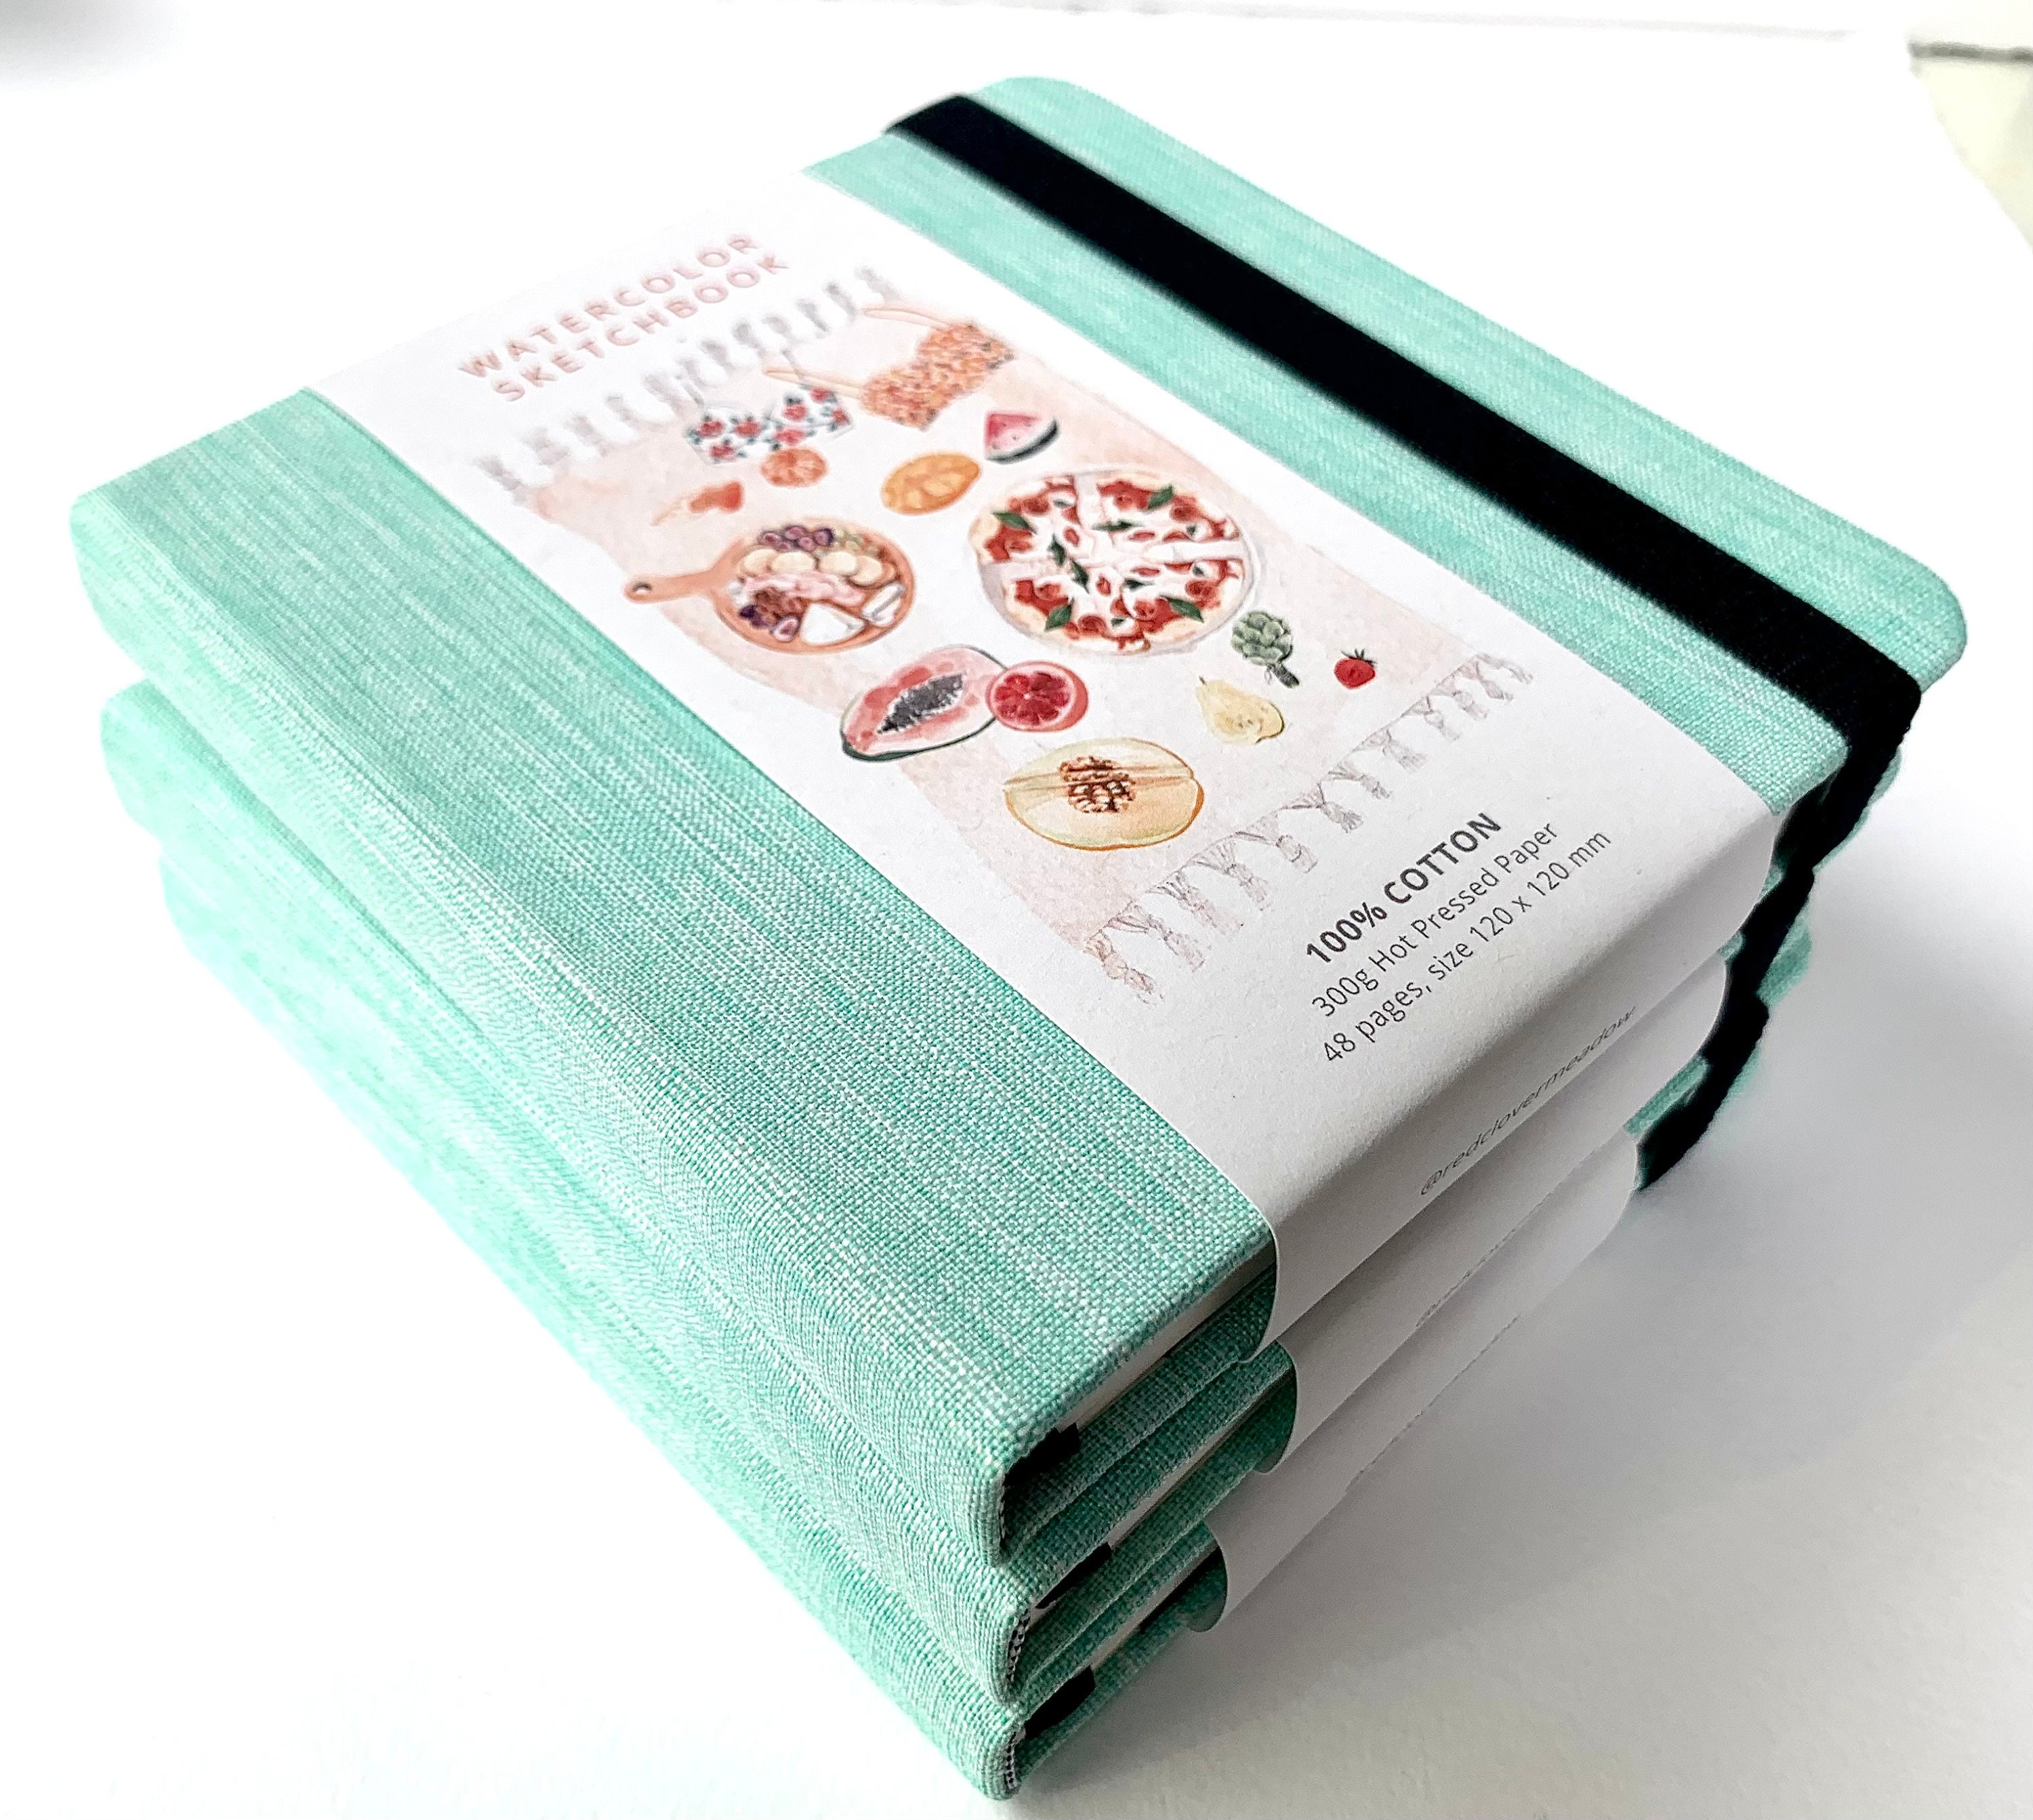 Watercolor Sketchbook With Hard Covers. 100% Cotton. 24 Sheets